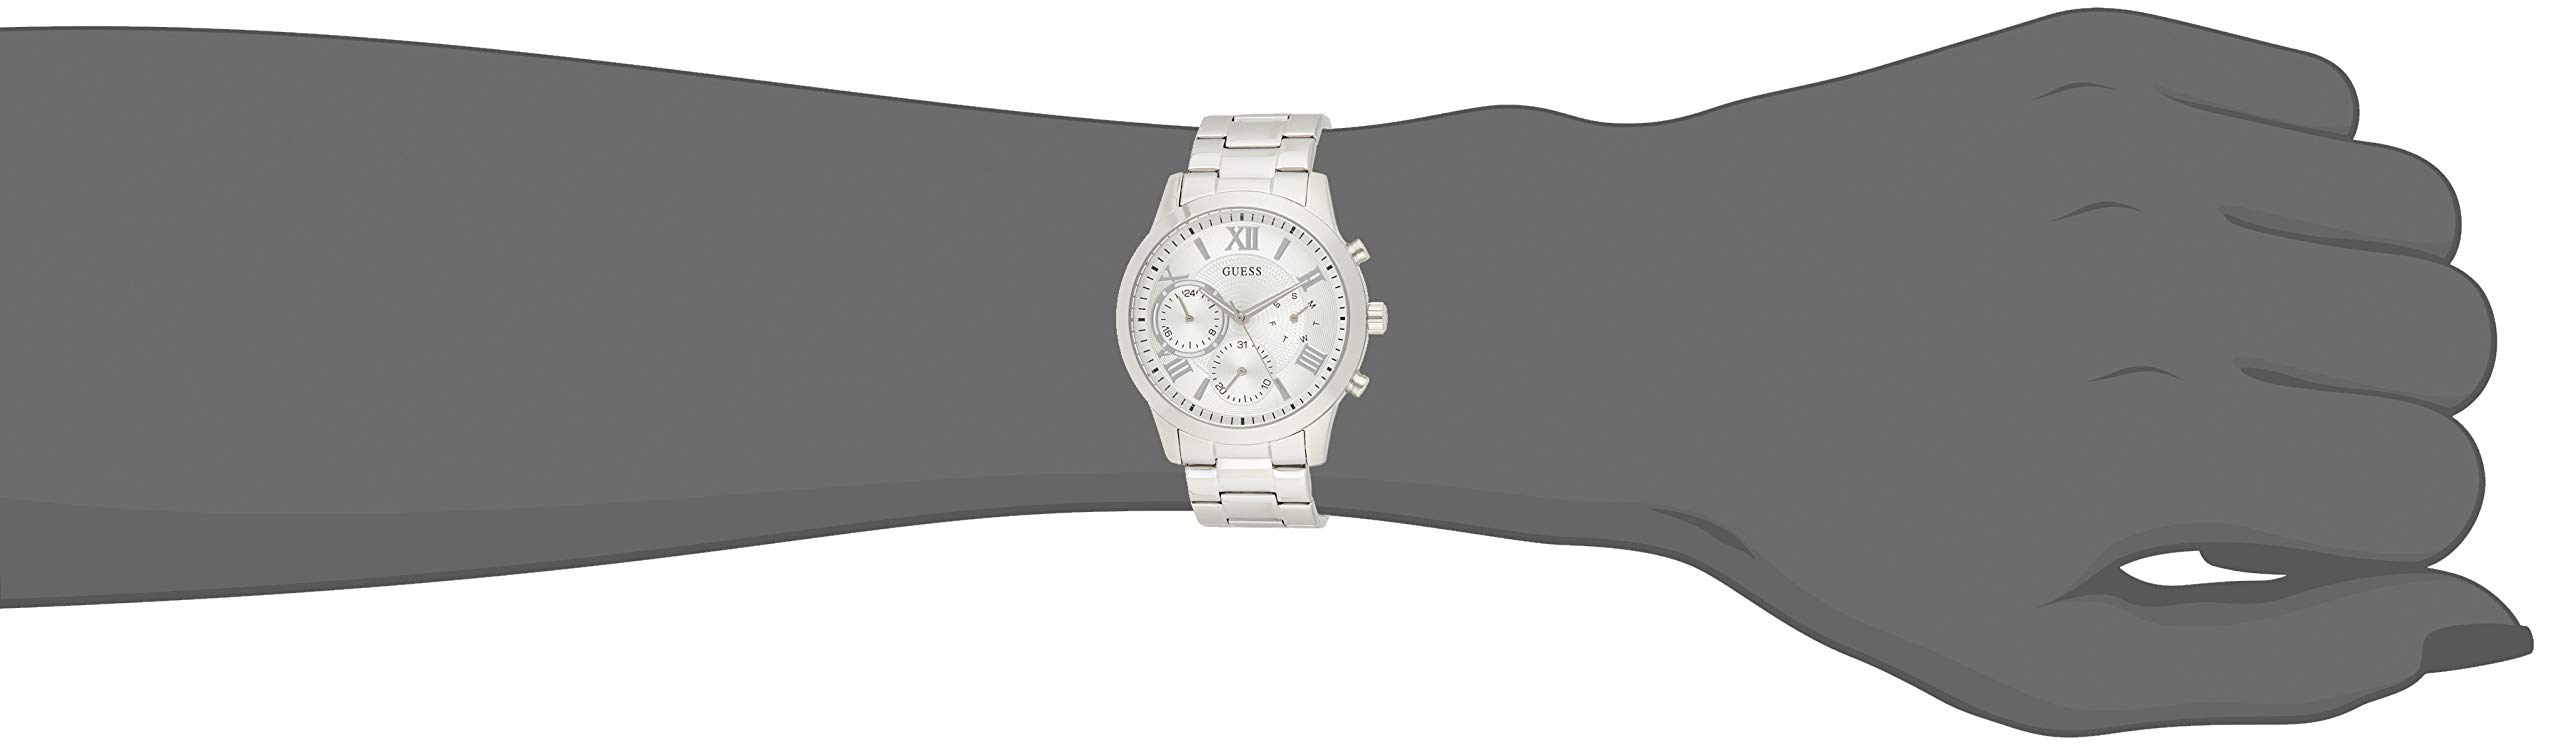 Guess Women's Multi-dial solar Watch with Stainless Steel Strap.